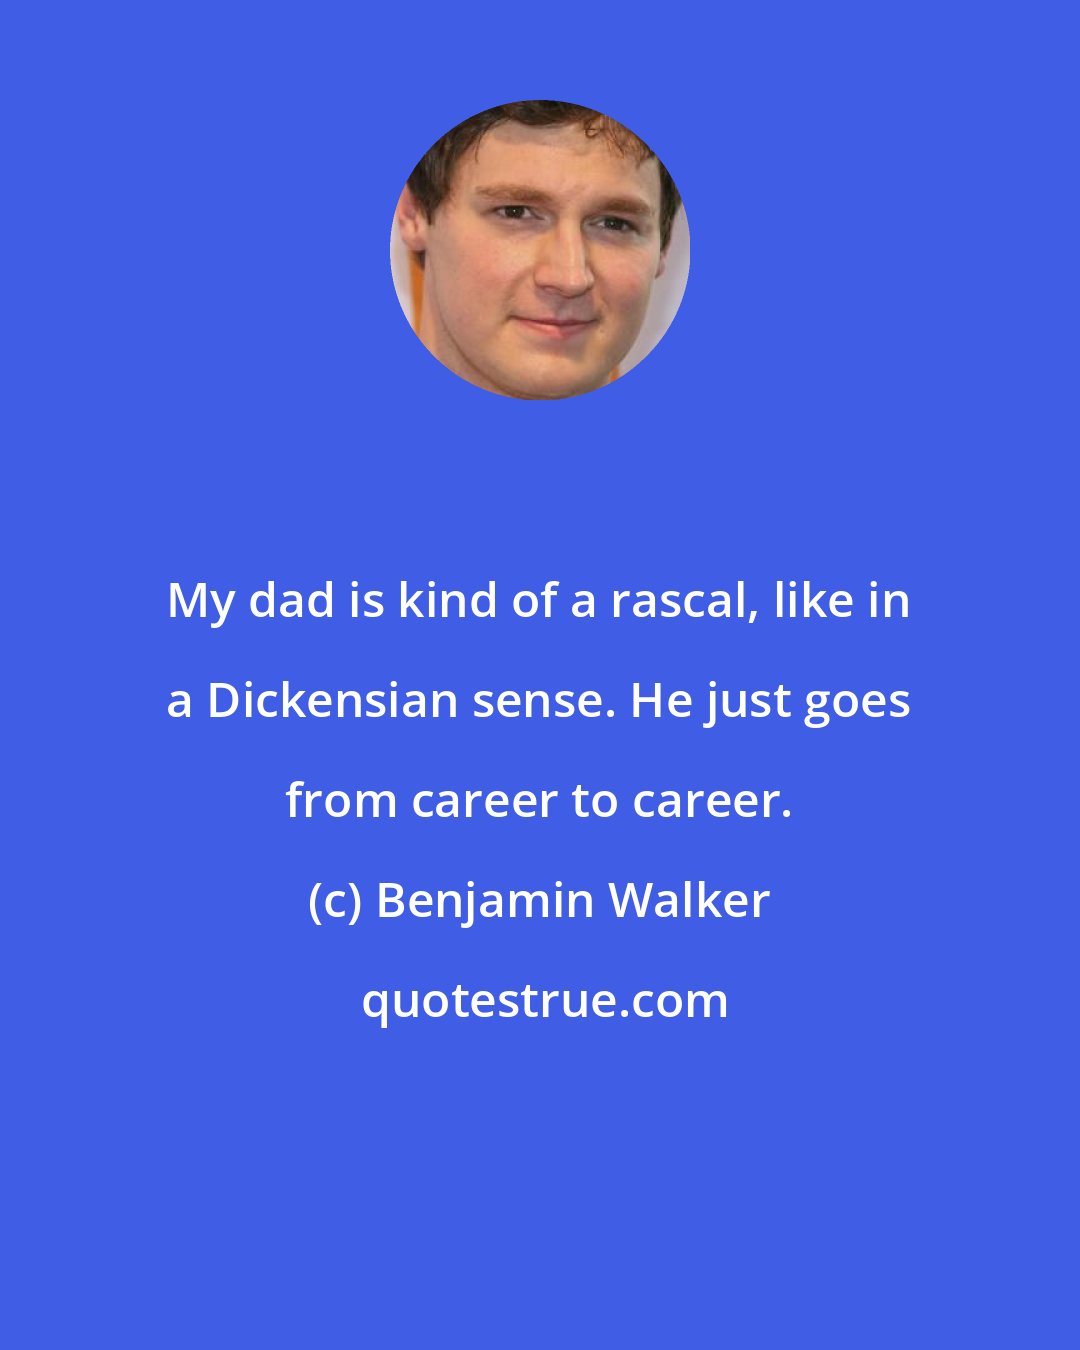 Benjamin Walker: My dad is kind of a rascal, like in a Dickensian sense. He just goes from career to career.